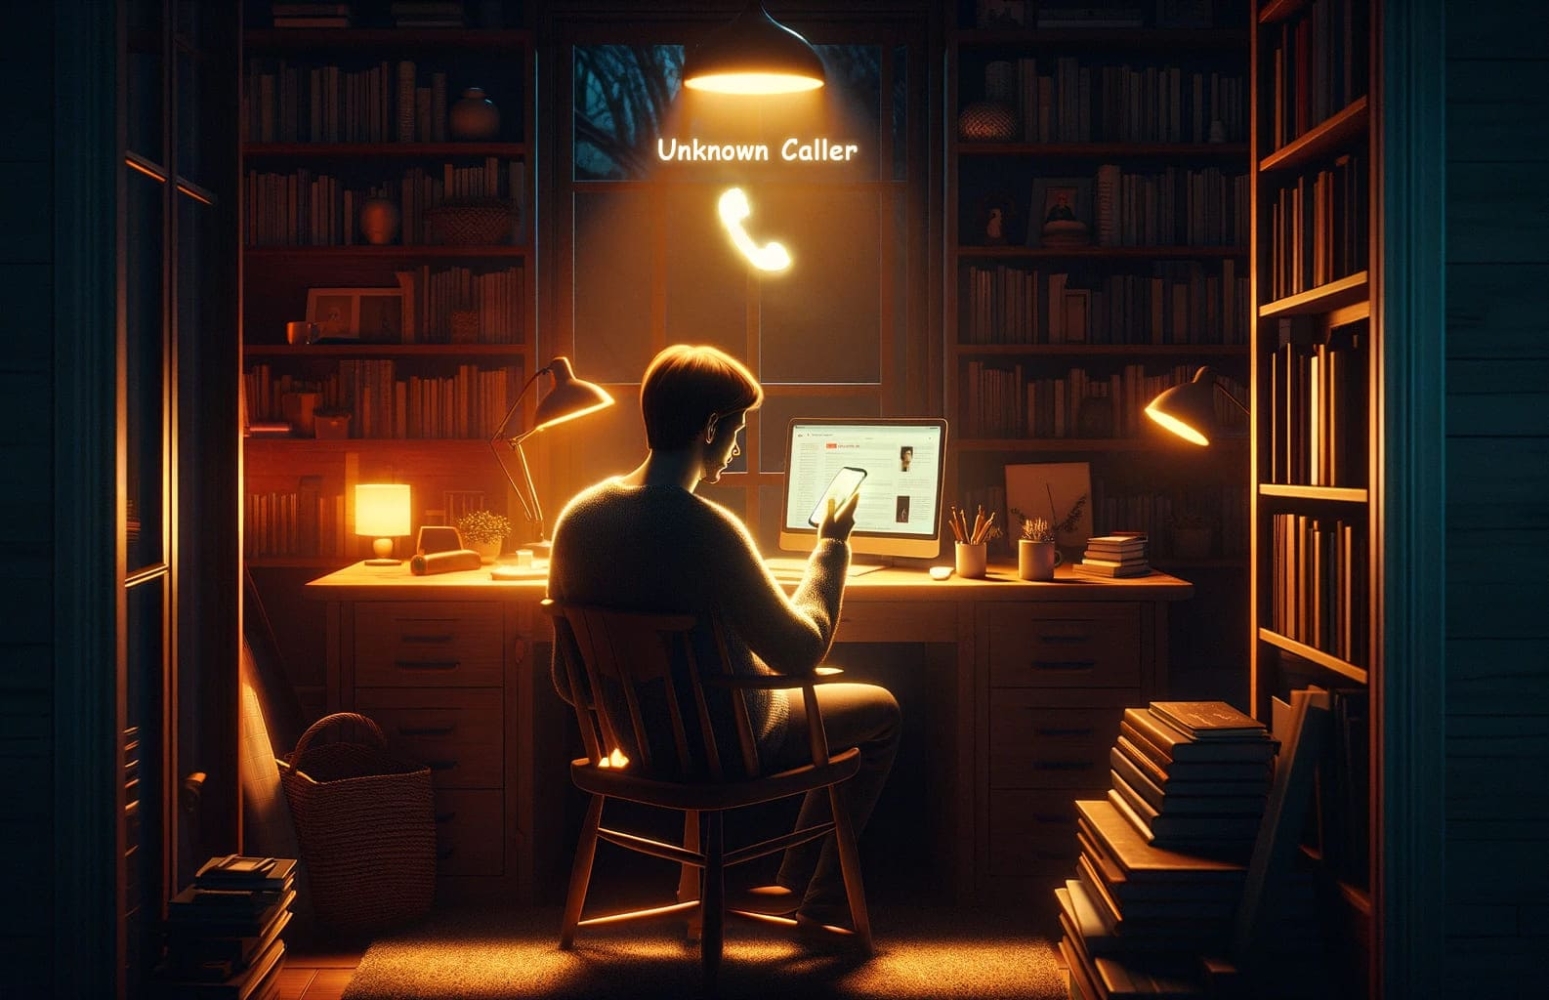 In a dark room with books on the shelves at the table and the computer is on, a man sits with a phone in his hands, on the monitor is open an article about finding the phone number of an unknown subscriber on an iPhone, while on the phone receives an incoming call from an unknown subscriber